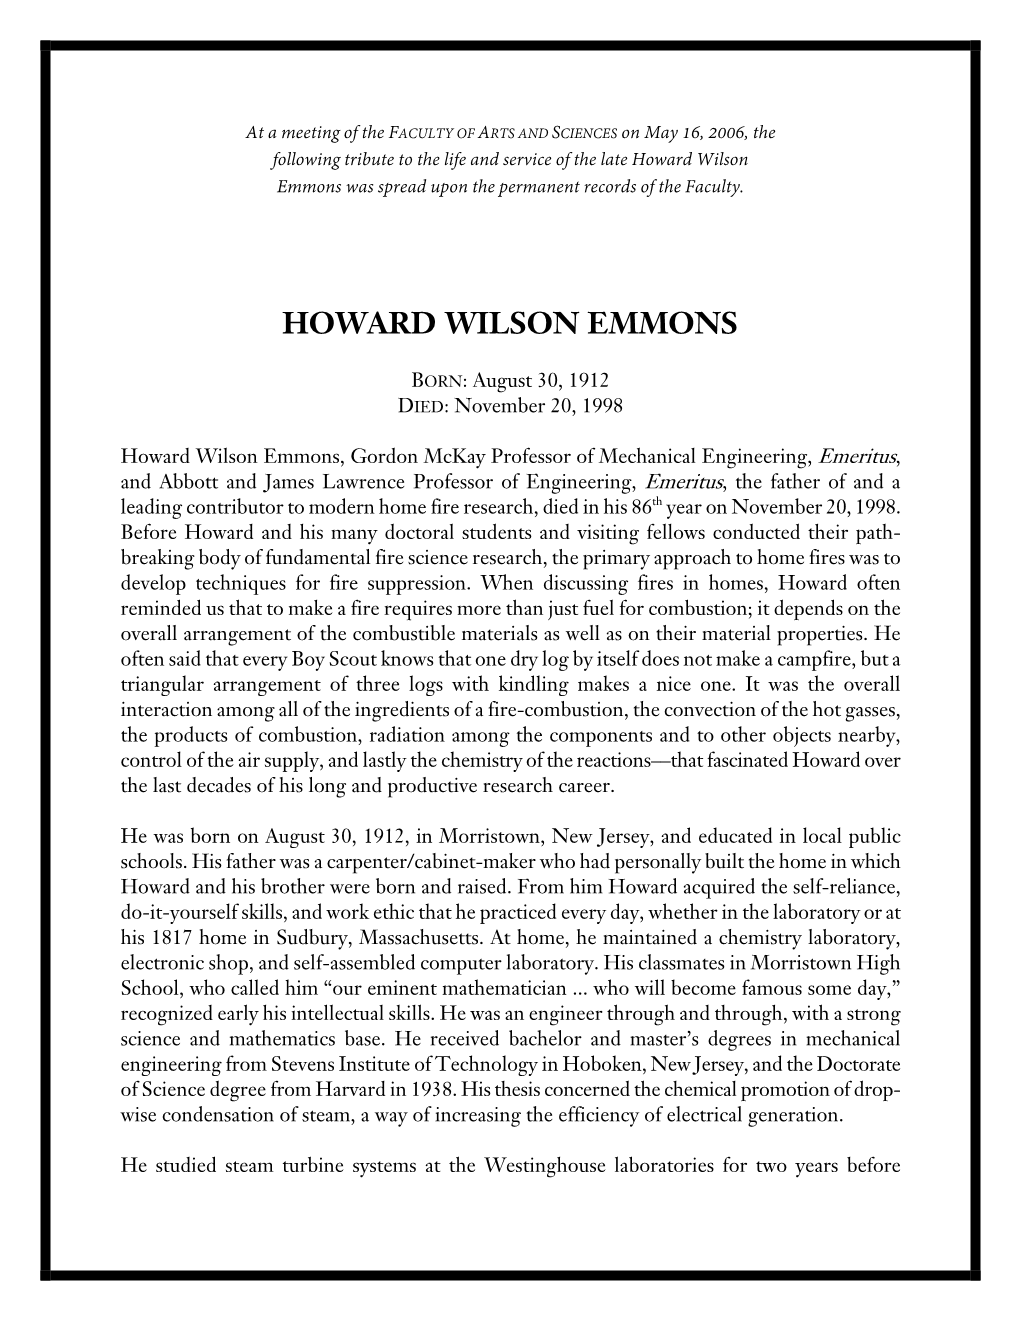 Howard Wilson Emmons Was Spread Upon the Permanent Records of the Faculty